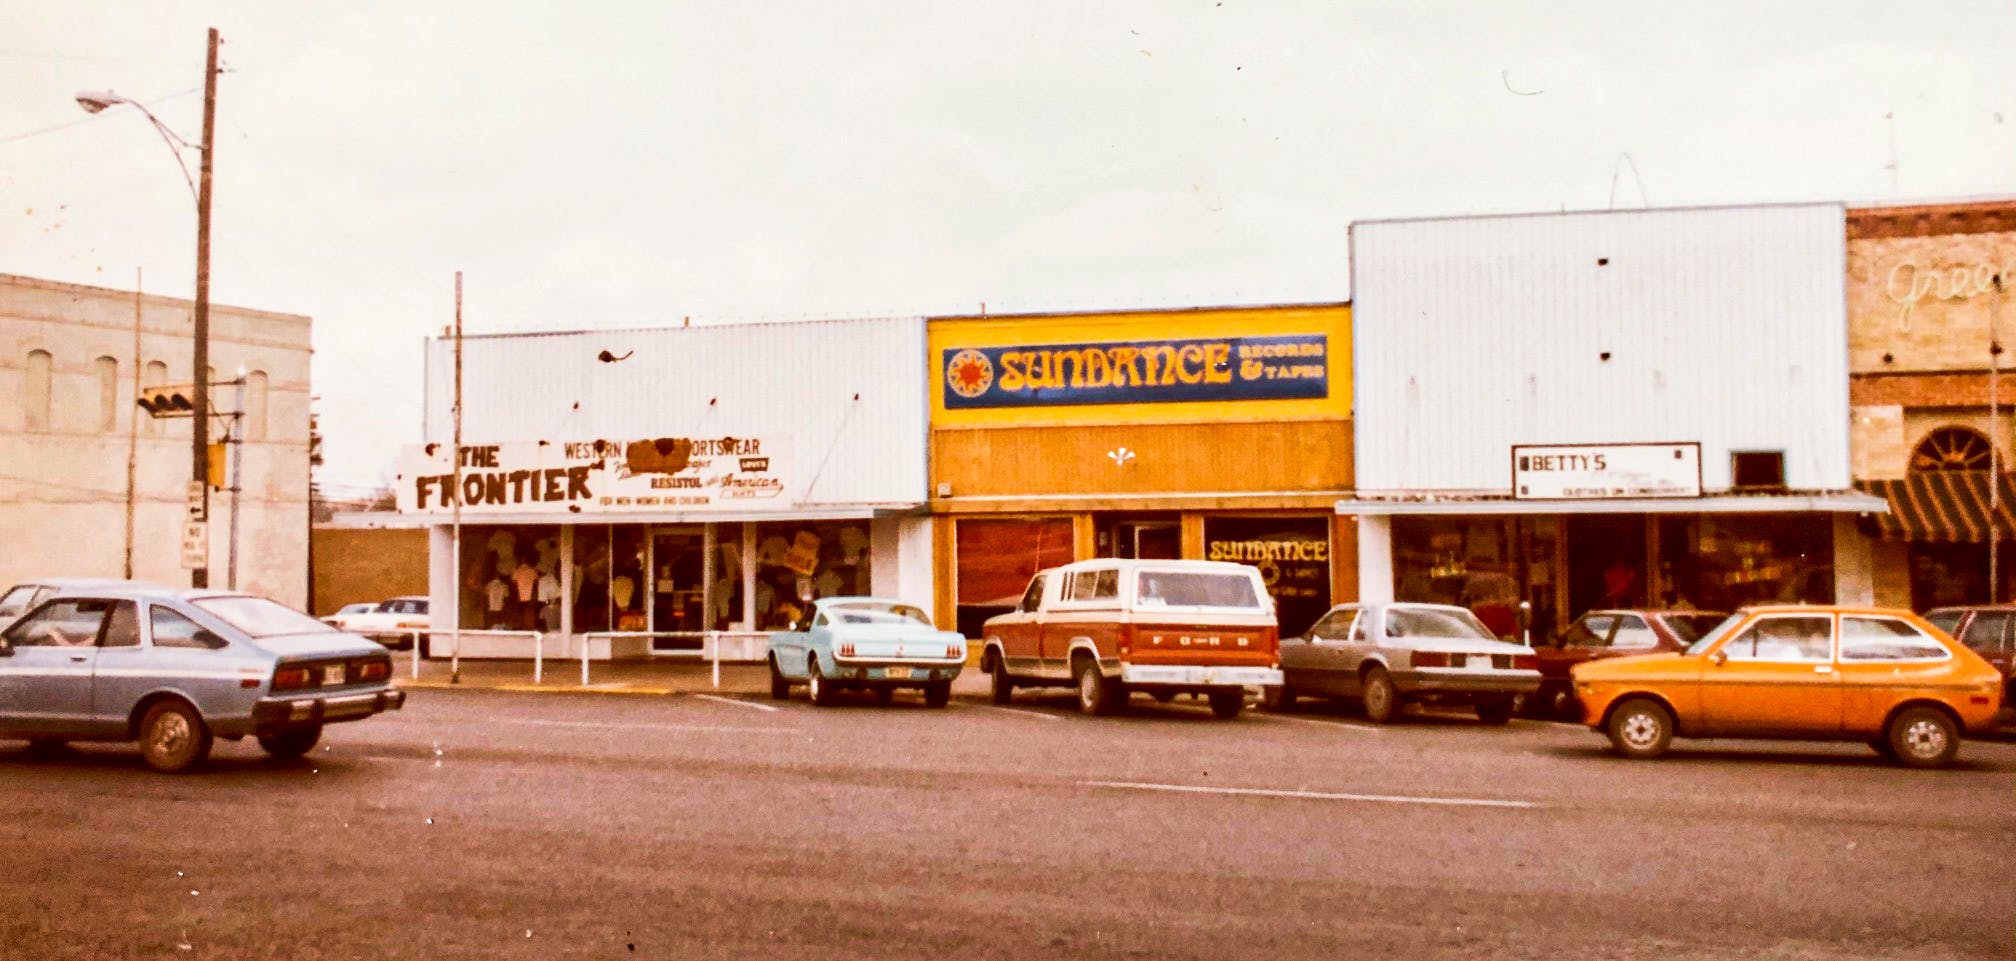 Street view of the second location at Sundance Records, which opened in 1985.